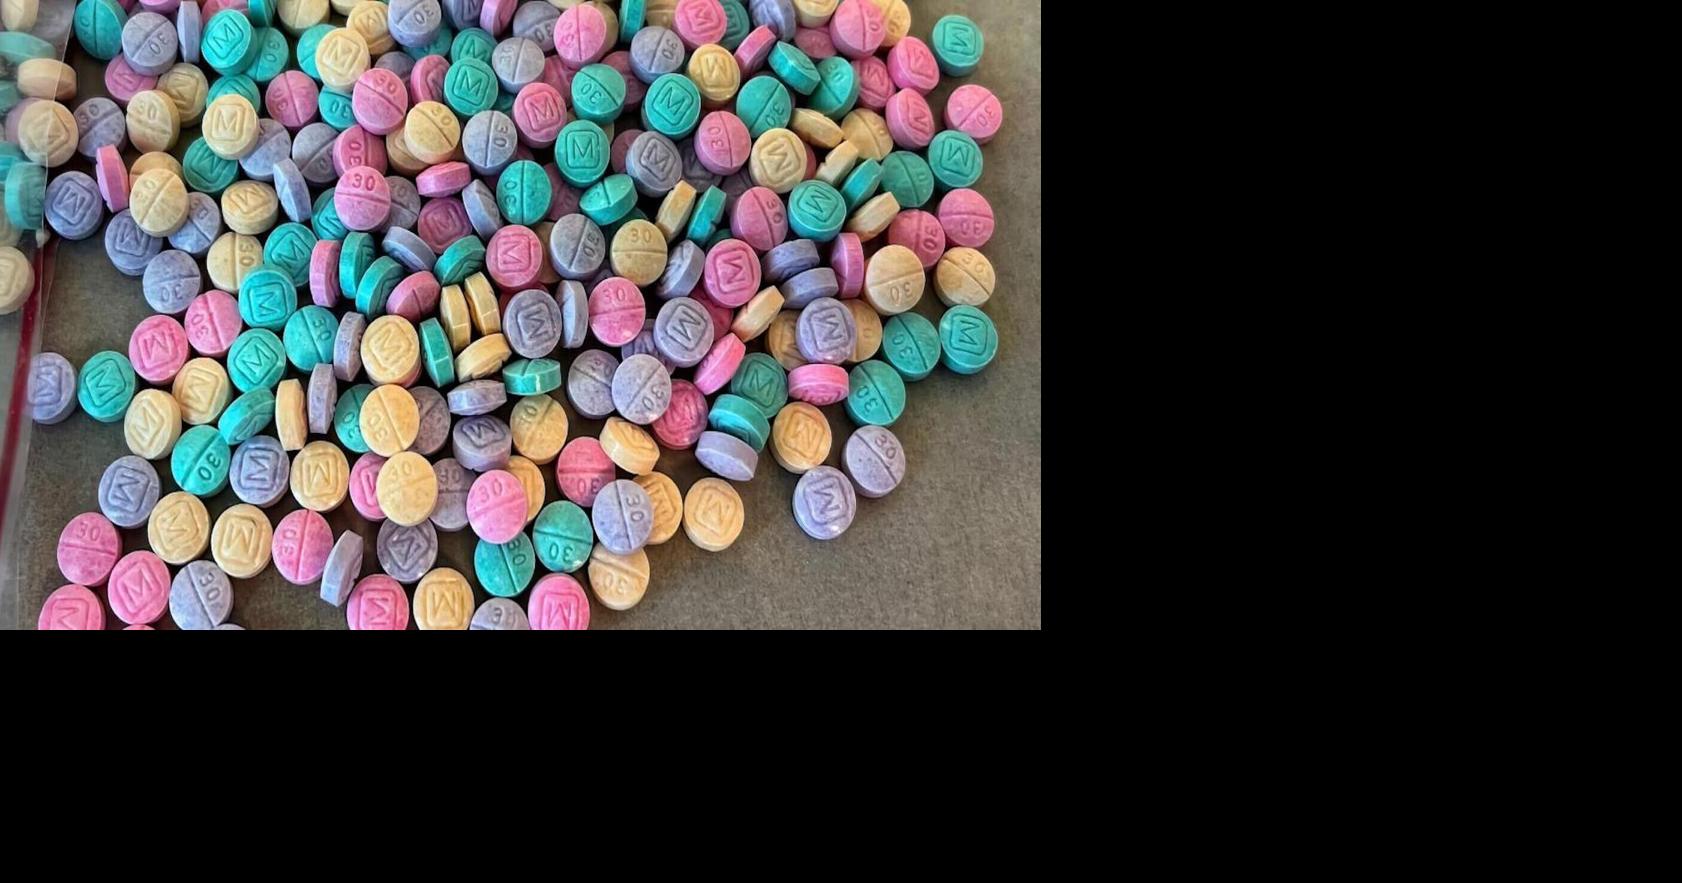 Arkansas Attorney General warns of fentanyl disguised as candy as Halloween approaches